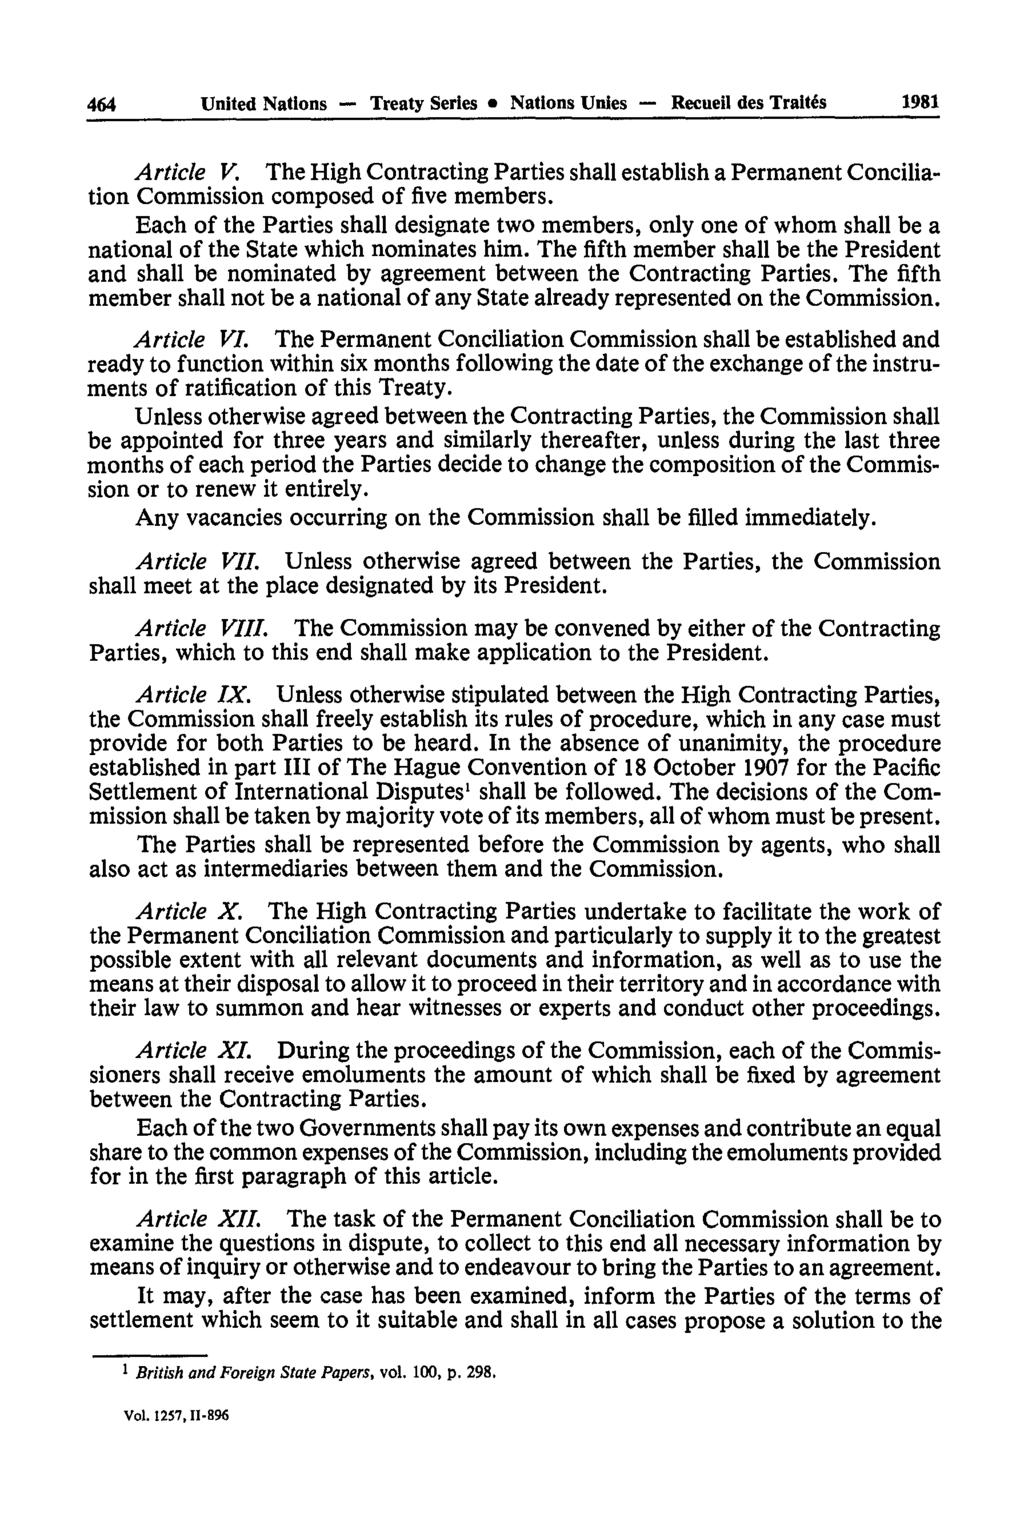 464 United Nations Treaty Series Nations Unies Recueil des Traités 1981 Article V. The High Contracting Parties shall establish a Permanent Concilia tion Commission composed of five members.